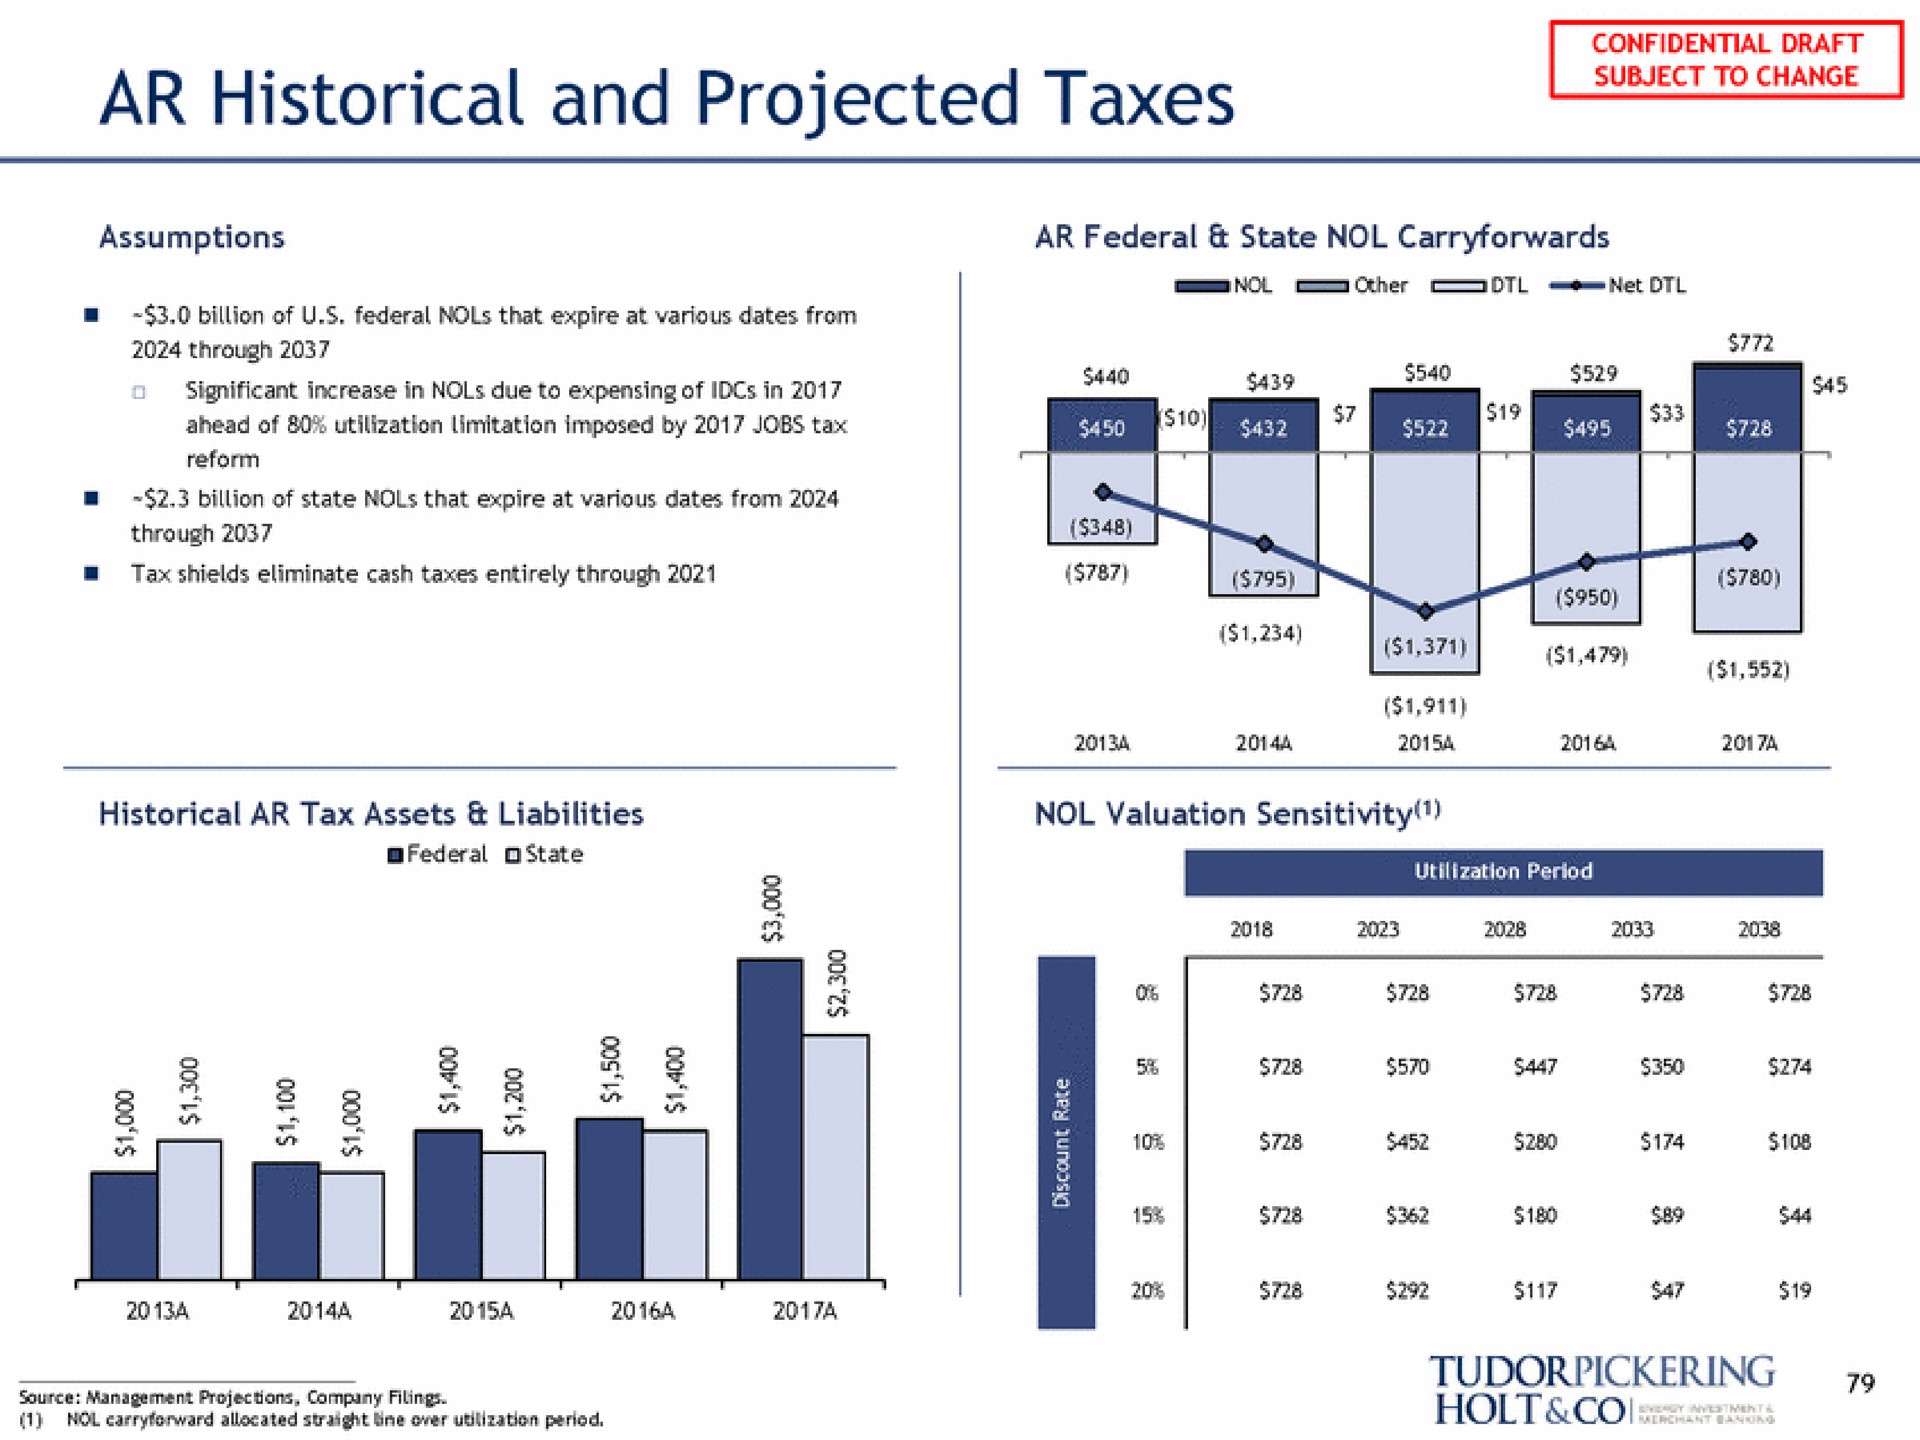 historical and projected taxes confidential draft to change subject | Tudor, Pickering, Holt & Co